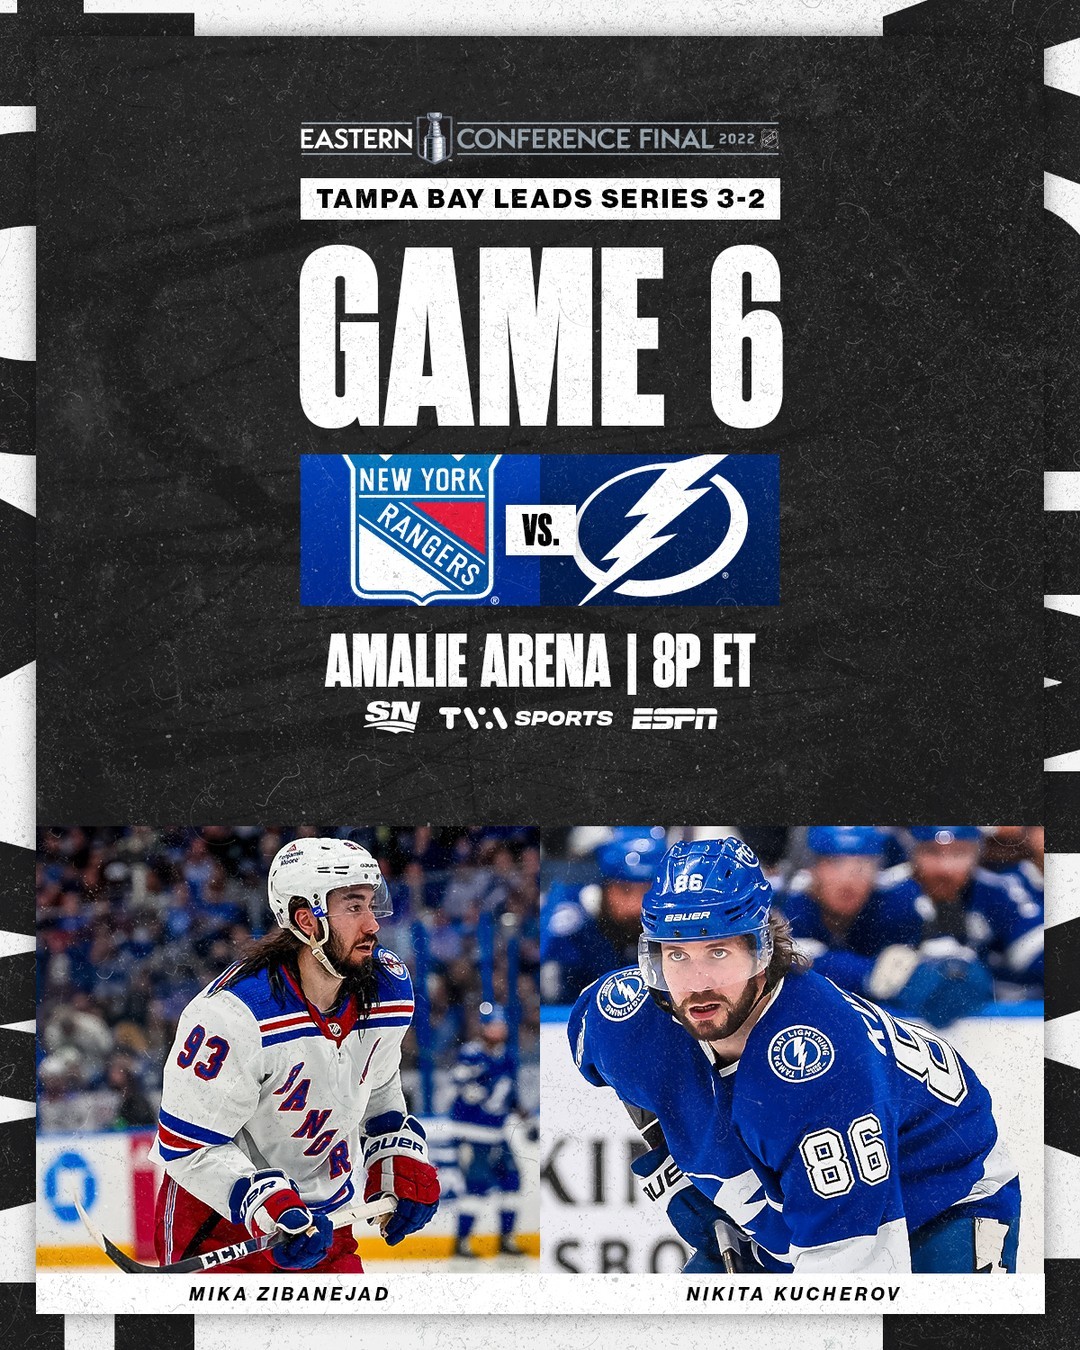 Will the @nyrangers force #Game7 or will the @tblightning advance to their third...